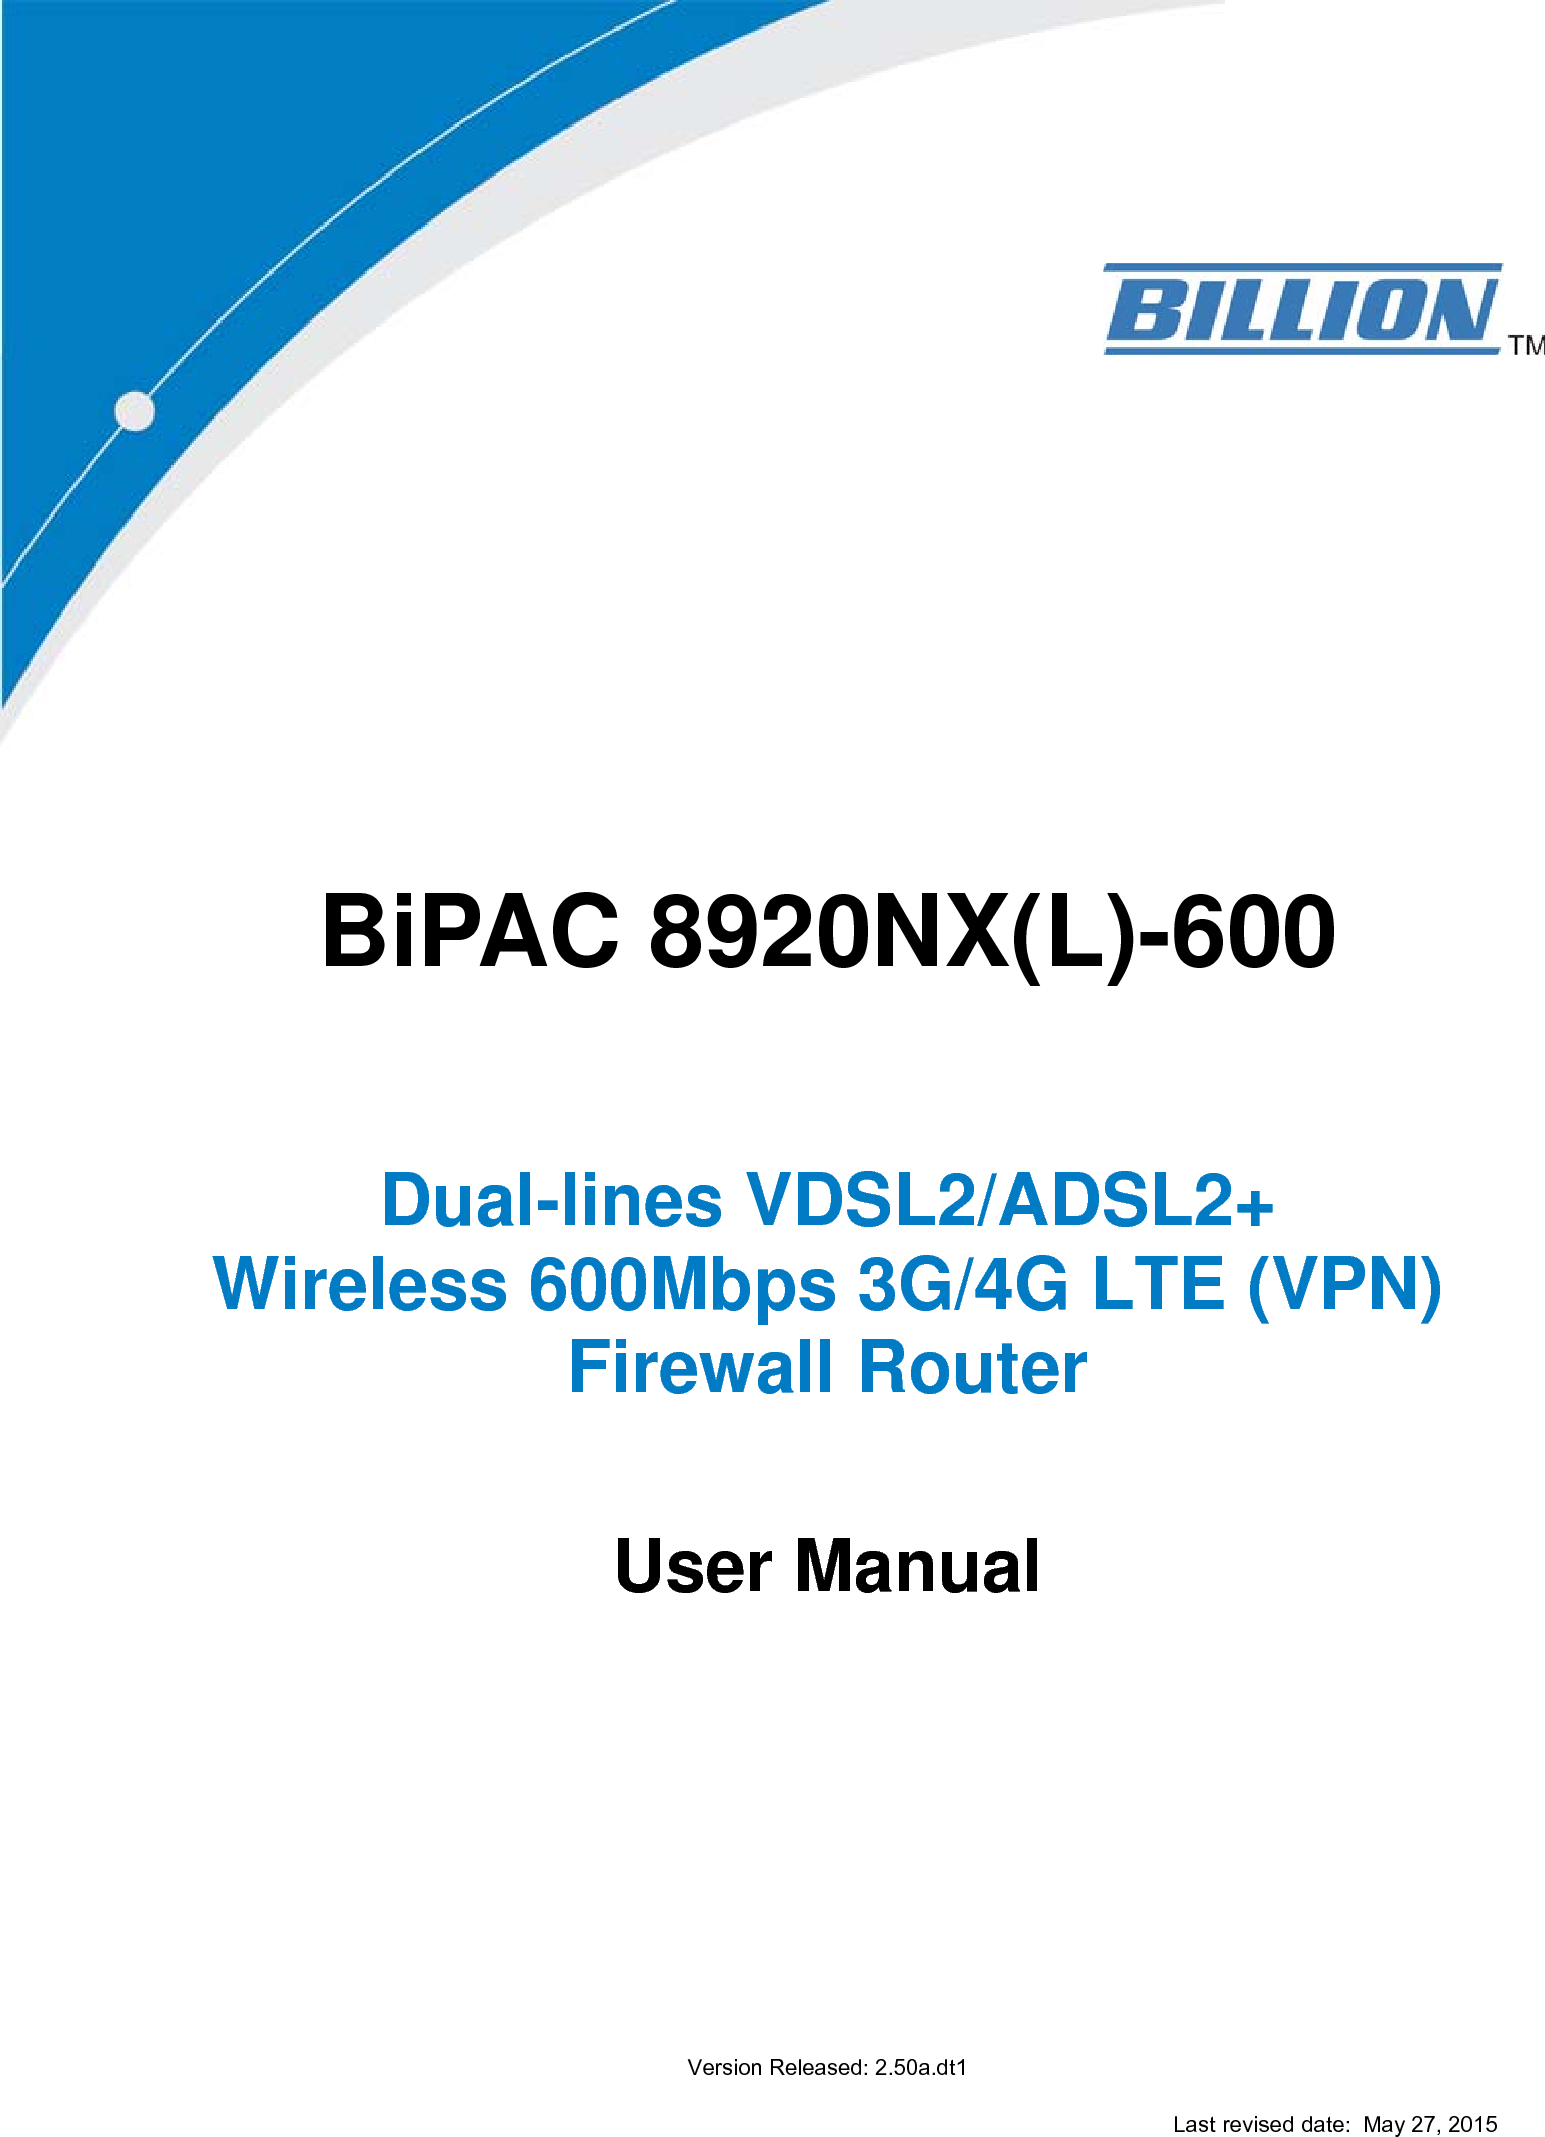                    BiPAC 8920NX(L)-600       Dual-lines VDSL2/ADSL2+  Wireless 600Mbps 3G/4G LTE (VPN) Firewall Router     User Manual                 Version Released: 2.50a.dt1  Last revised date:  May 27, 2015 